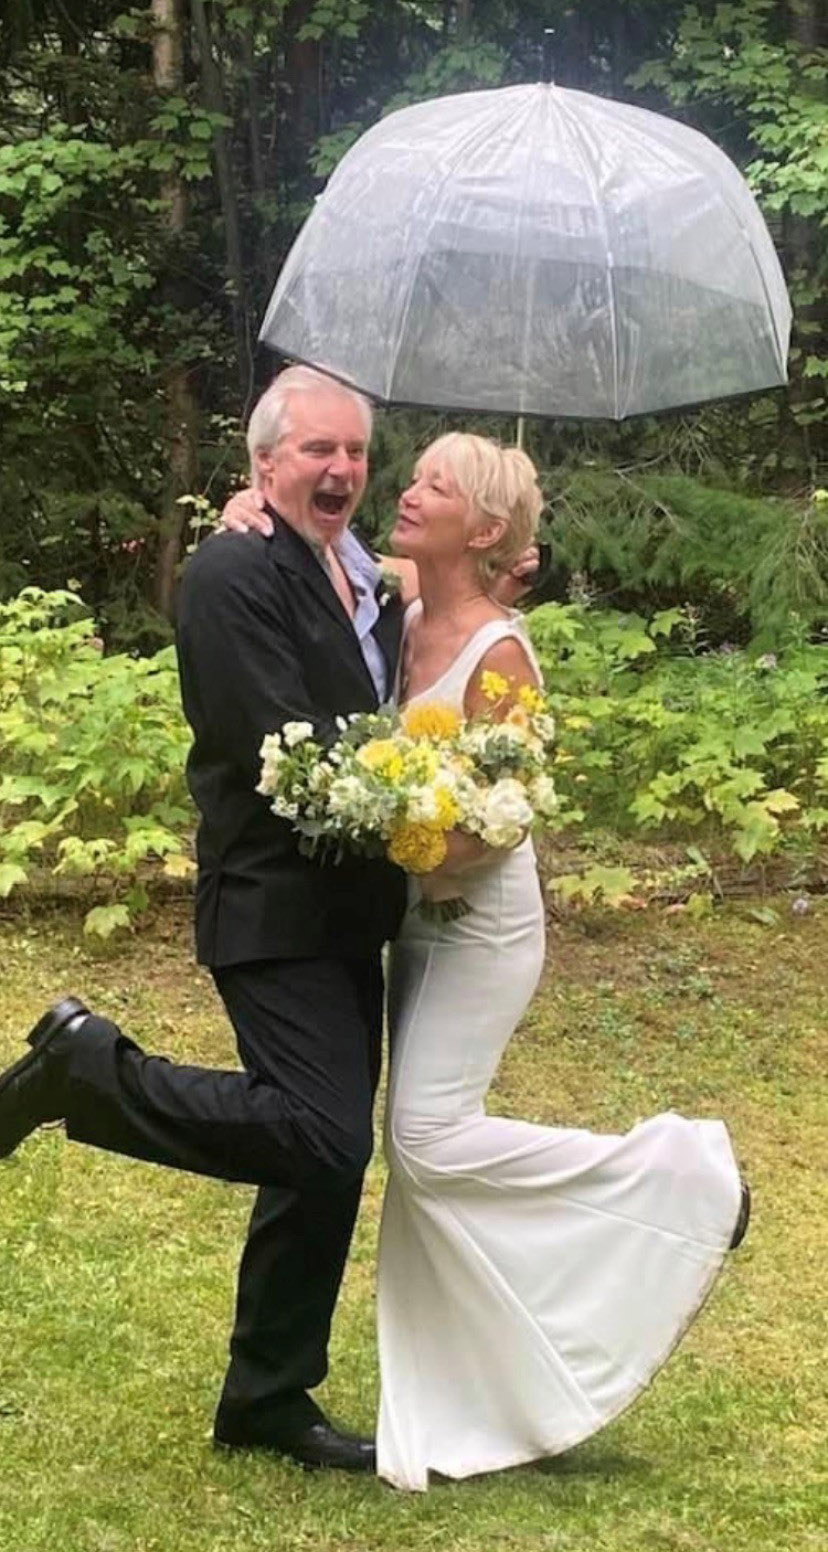 A man with grey hair on the left wearing a black suit, with his right leg up while standing on the left, and holding an umbrella, facing a woman with blonde hair in a wedding dress, holding a bouquet of white and yellow flowers, with her left leg up while standing on the right.